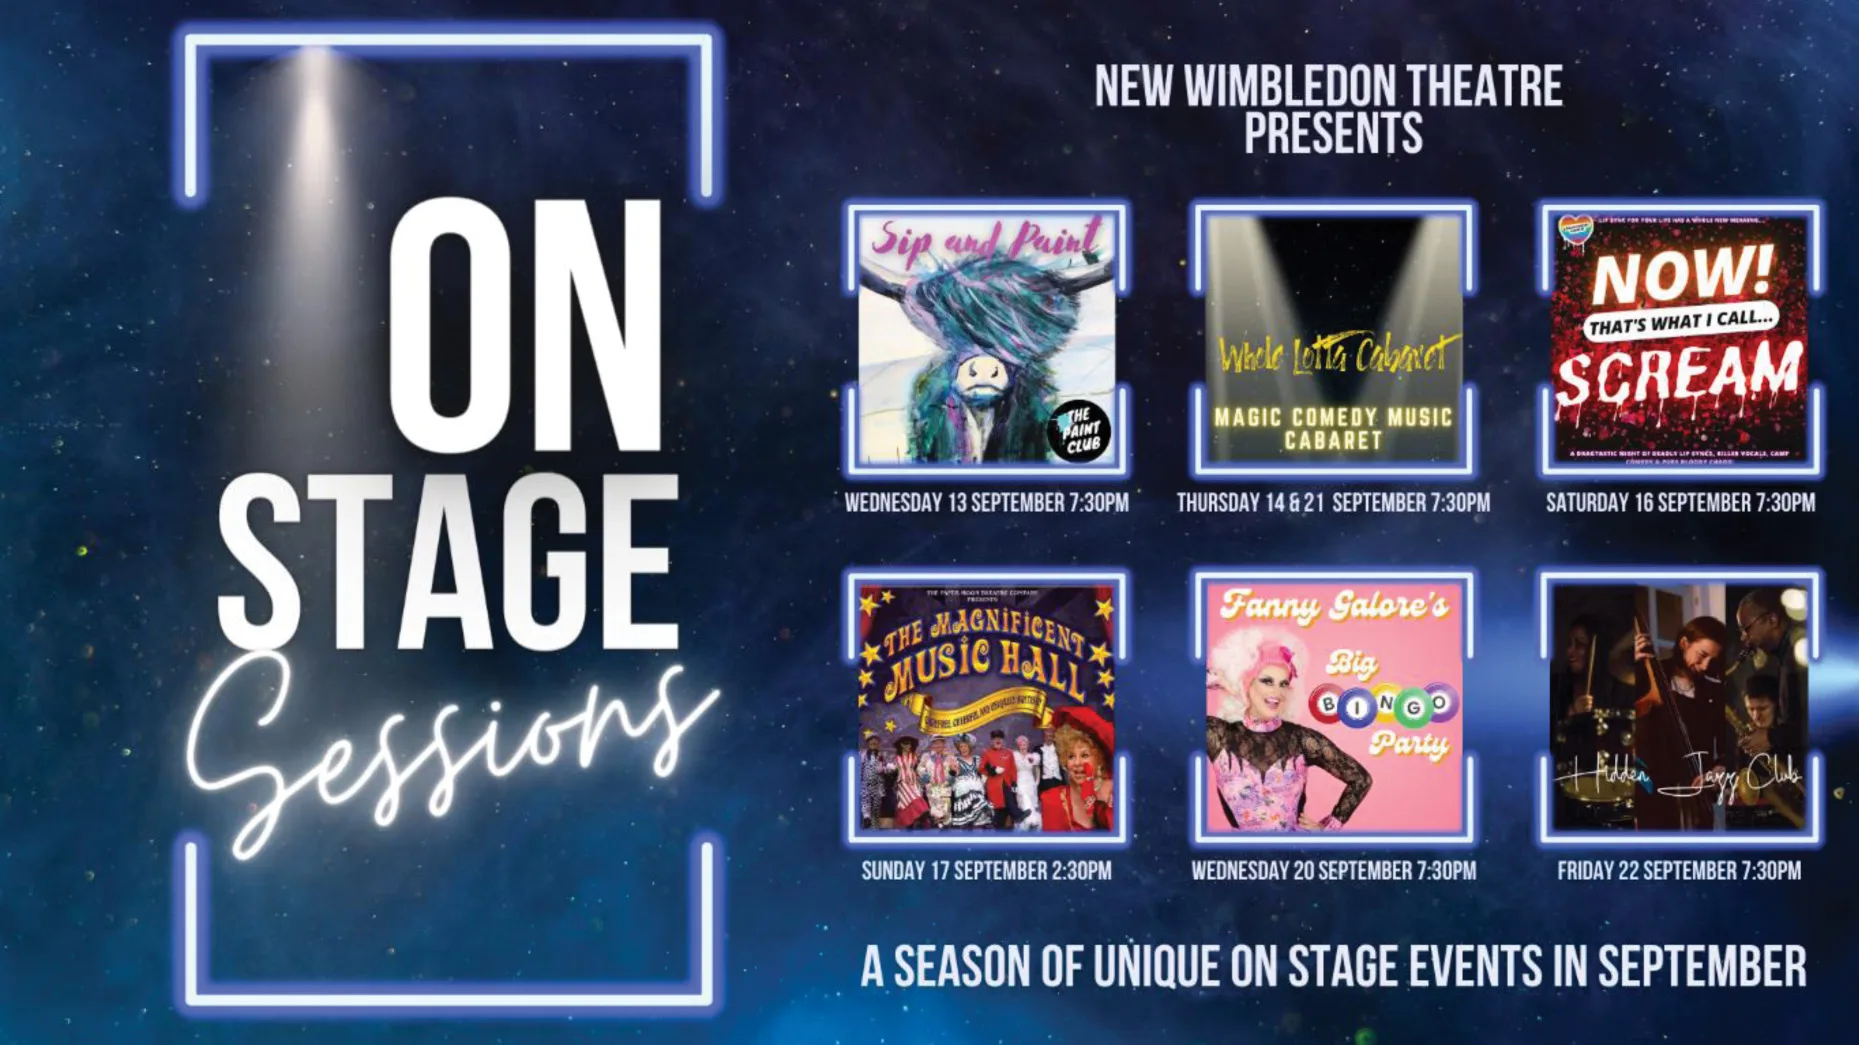 YOUR NEWS – Onstage Sessions